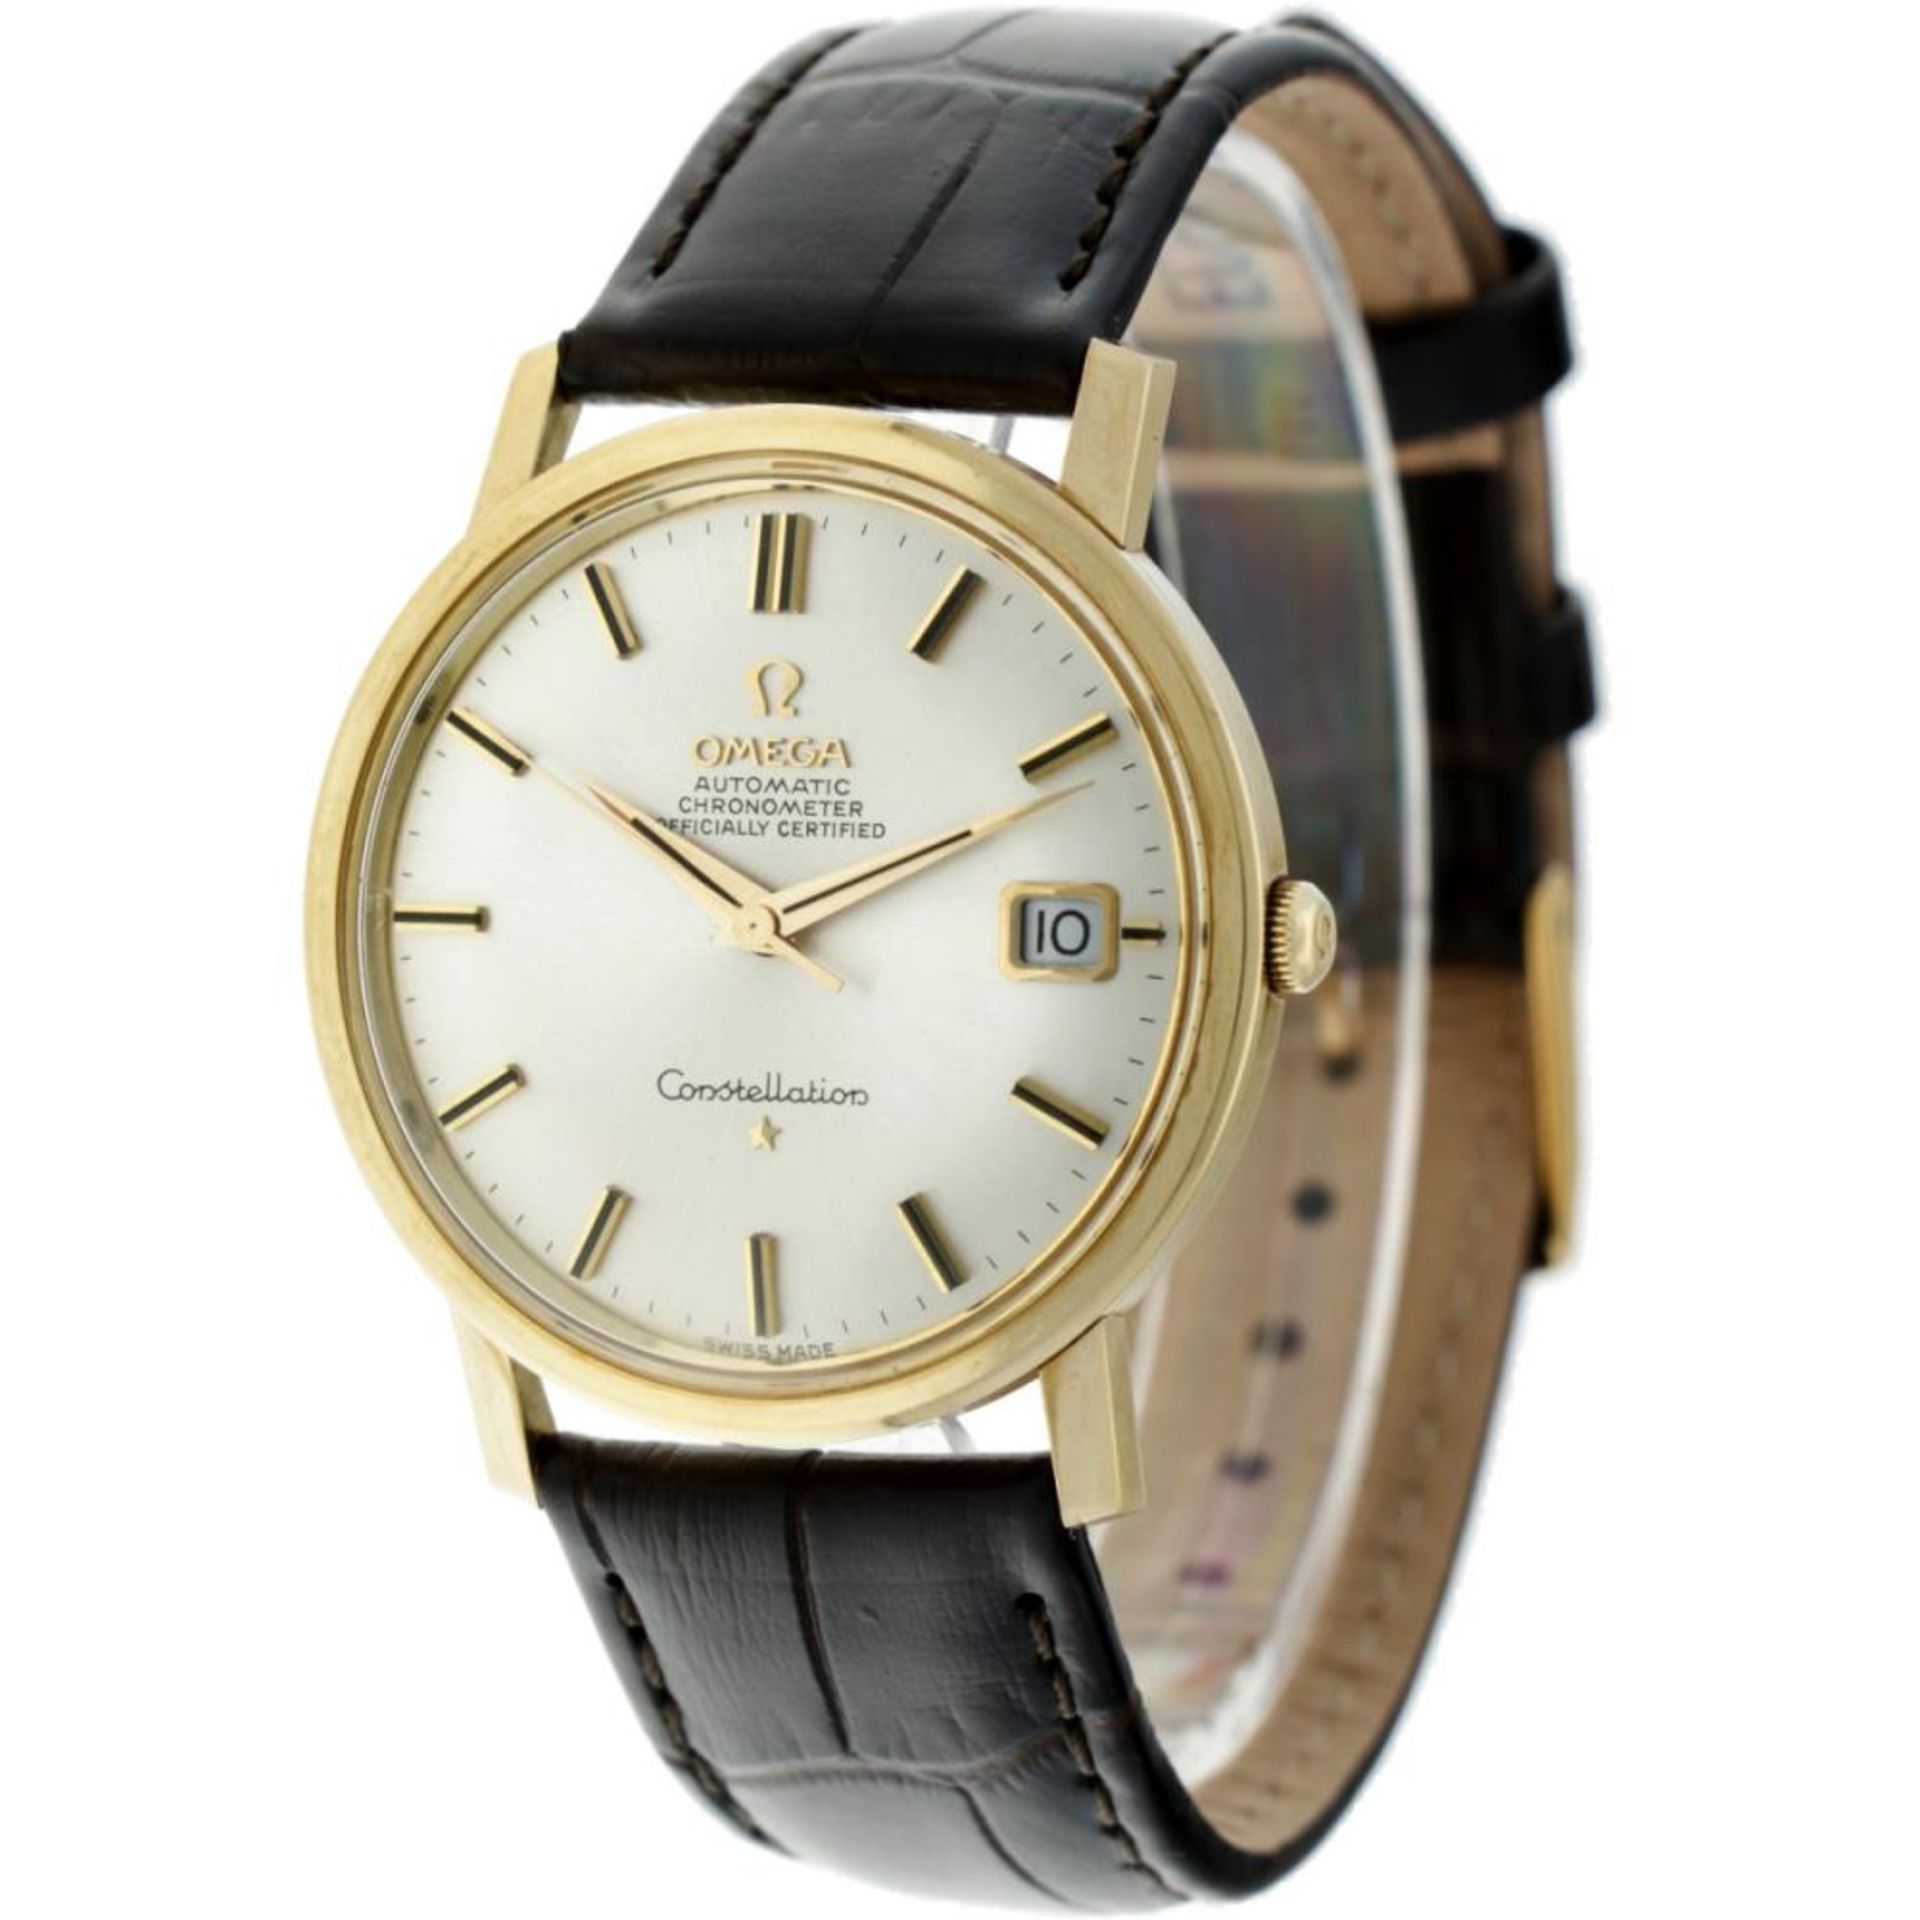 Omega Constellation 168.010 - Zelim Jacot dial - Men's watch - approx. 1967. - Image 2 of 6